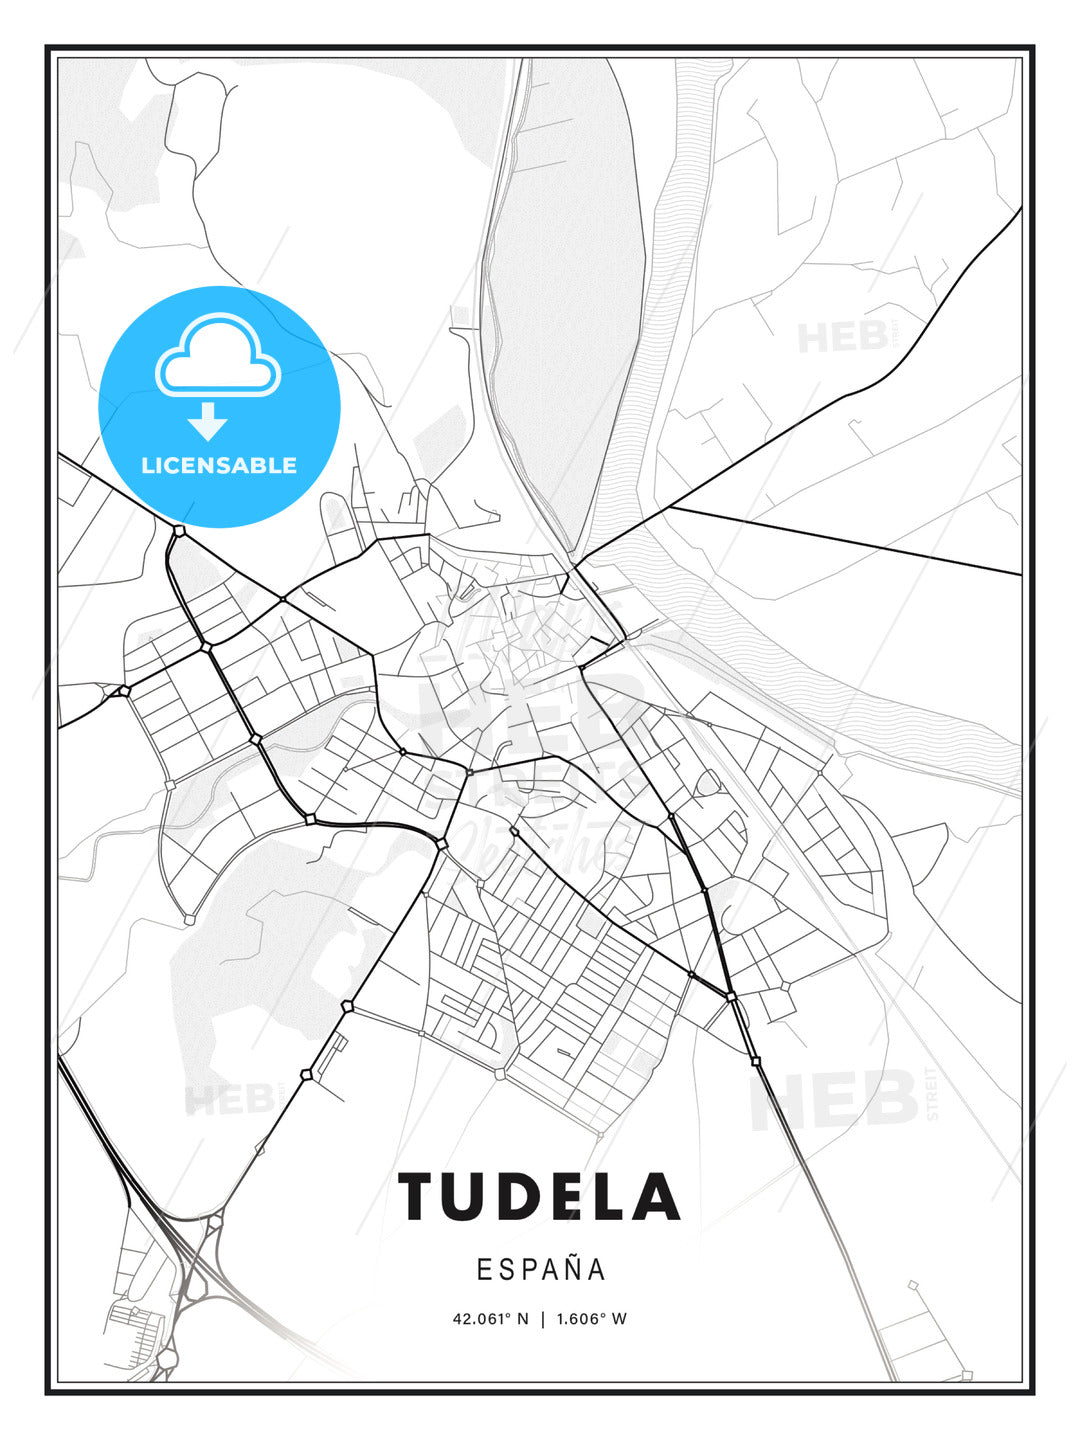 Tudela, Spain, Modern Print Template in Various Formats - HEBSTREITS Sketches